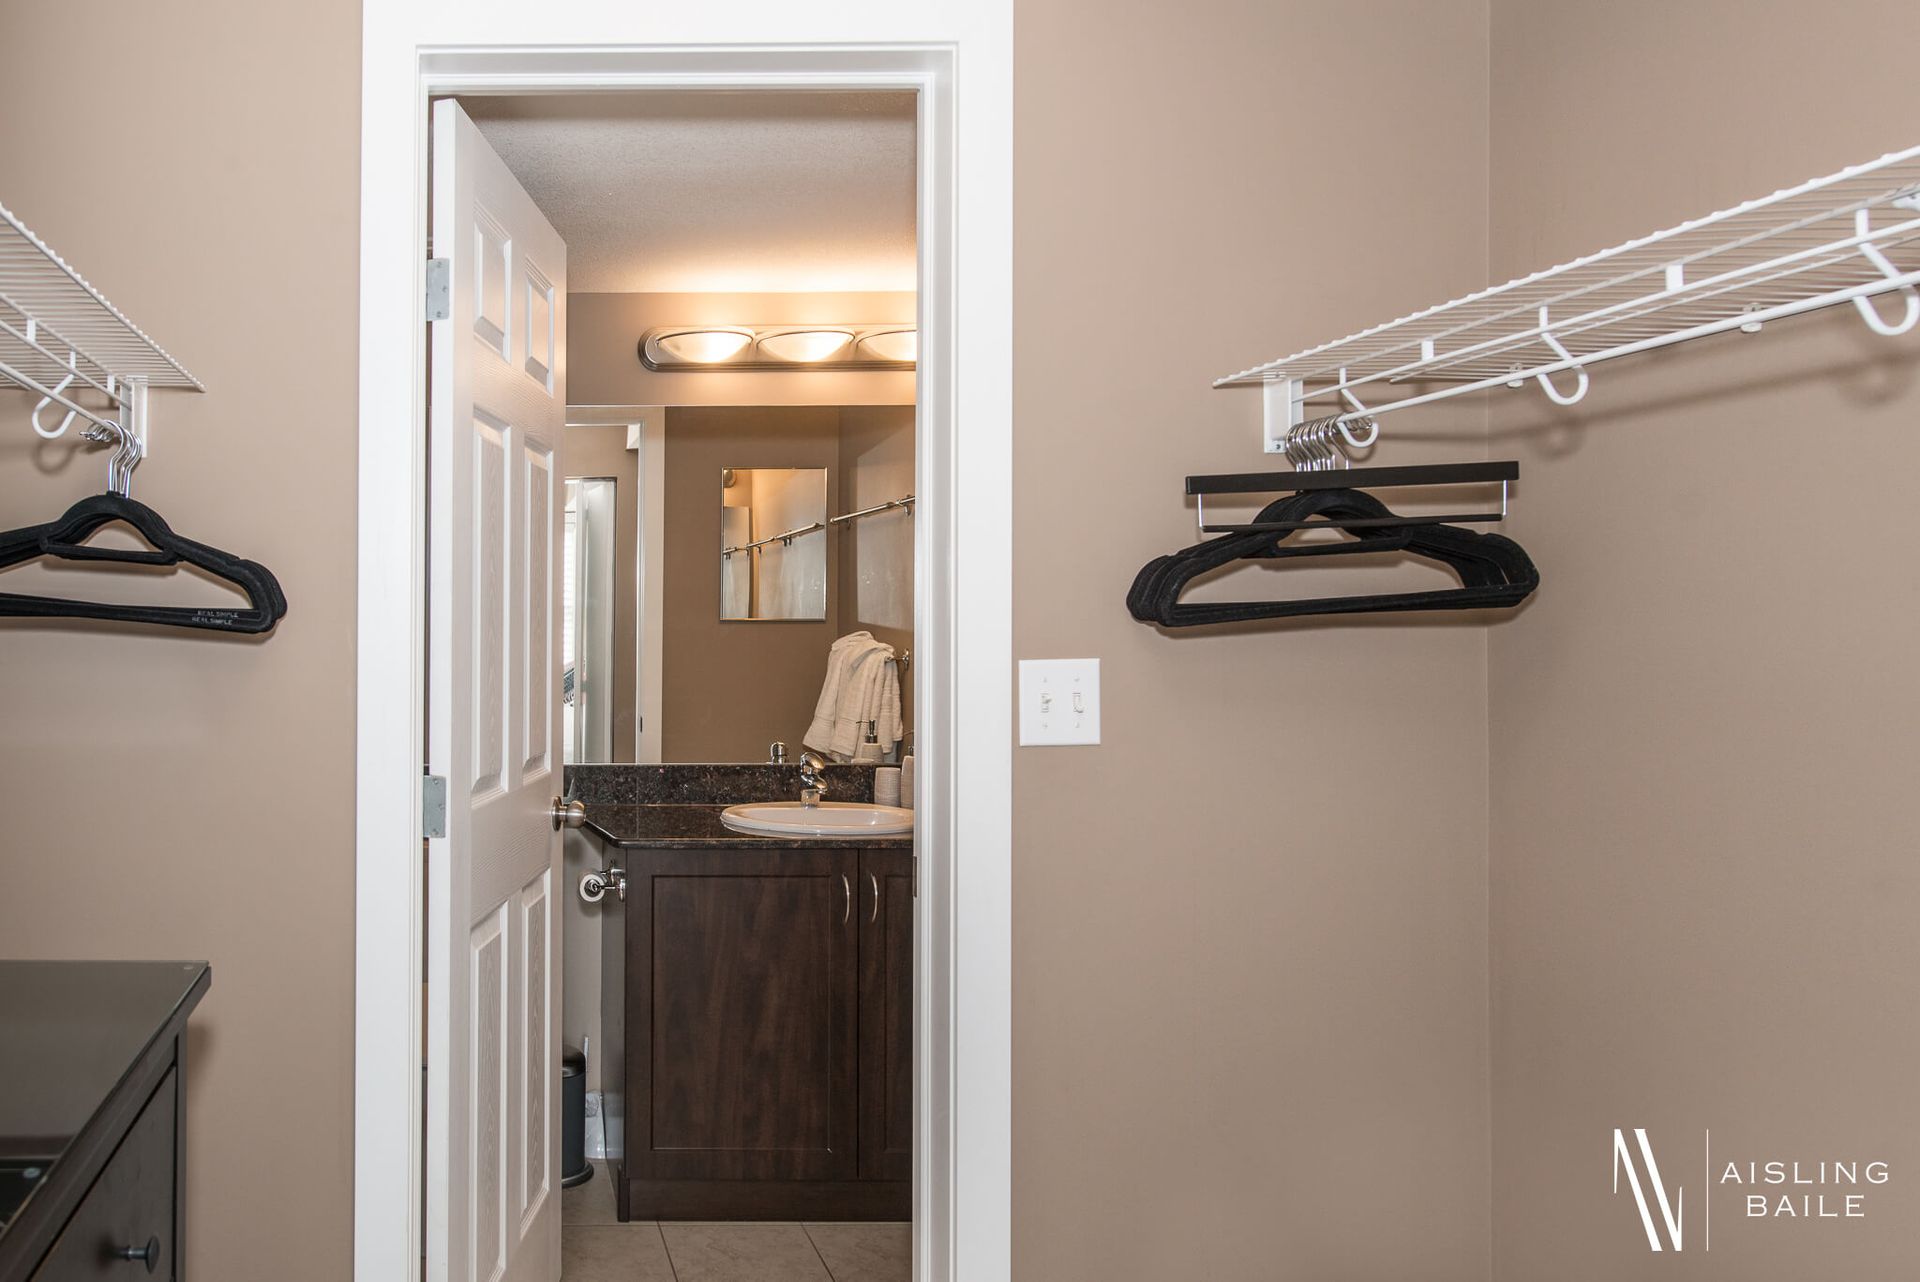 Walk-through closet of the Stylish condo of Lake Windermere Pointe in Invermere, a BC Vacation Rental hosted by Aisling Baile Property Management.